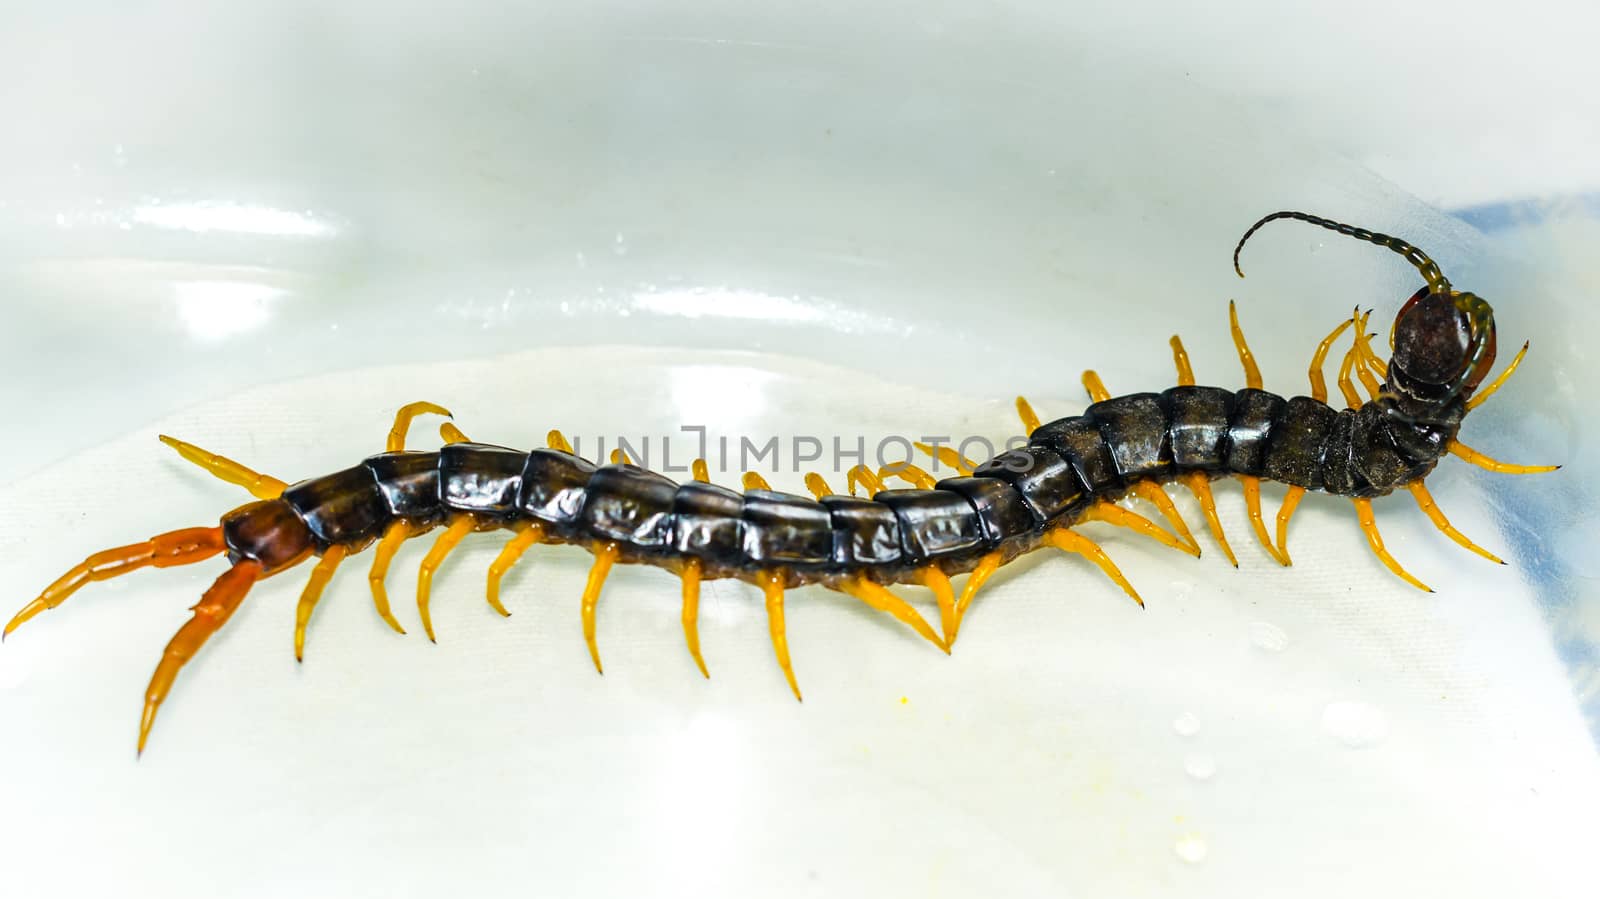 Centipede close up by darksoul72